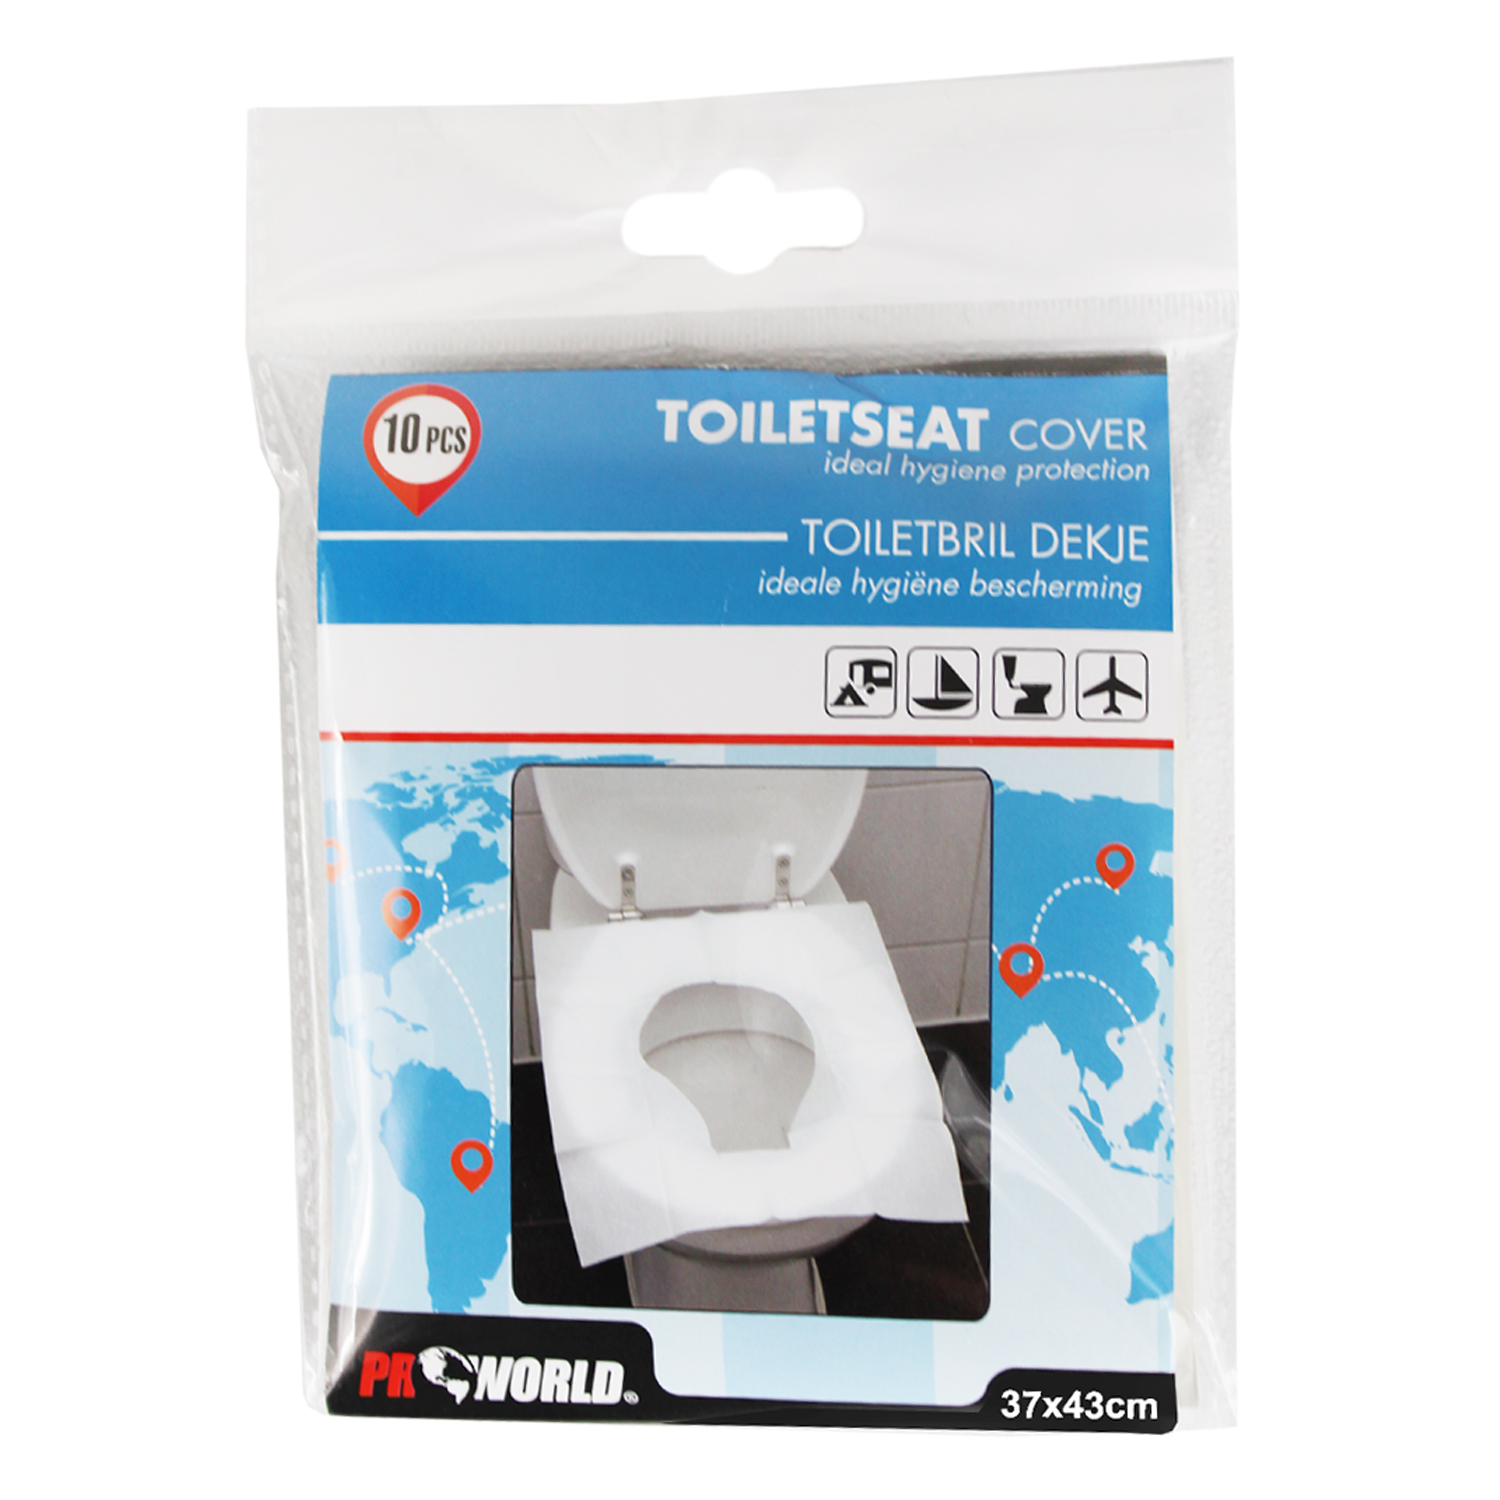 Disposable Clean Toilet Seat Covers Hygienic Protection Flushable Cover UK STOCK 